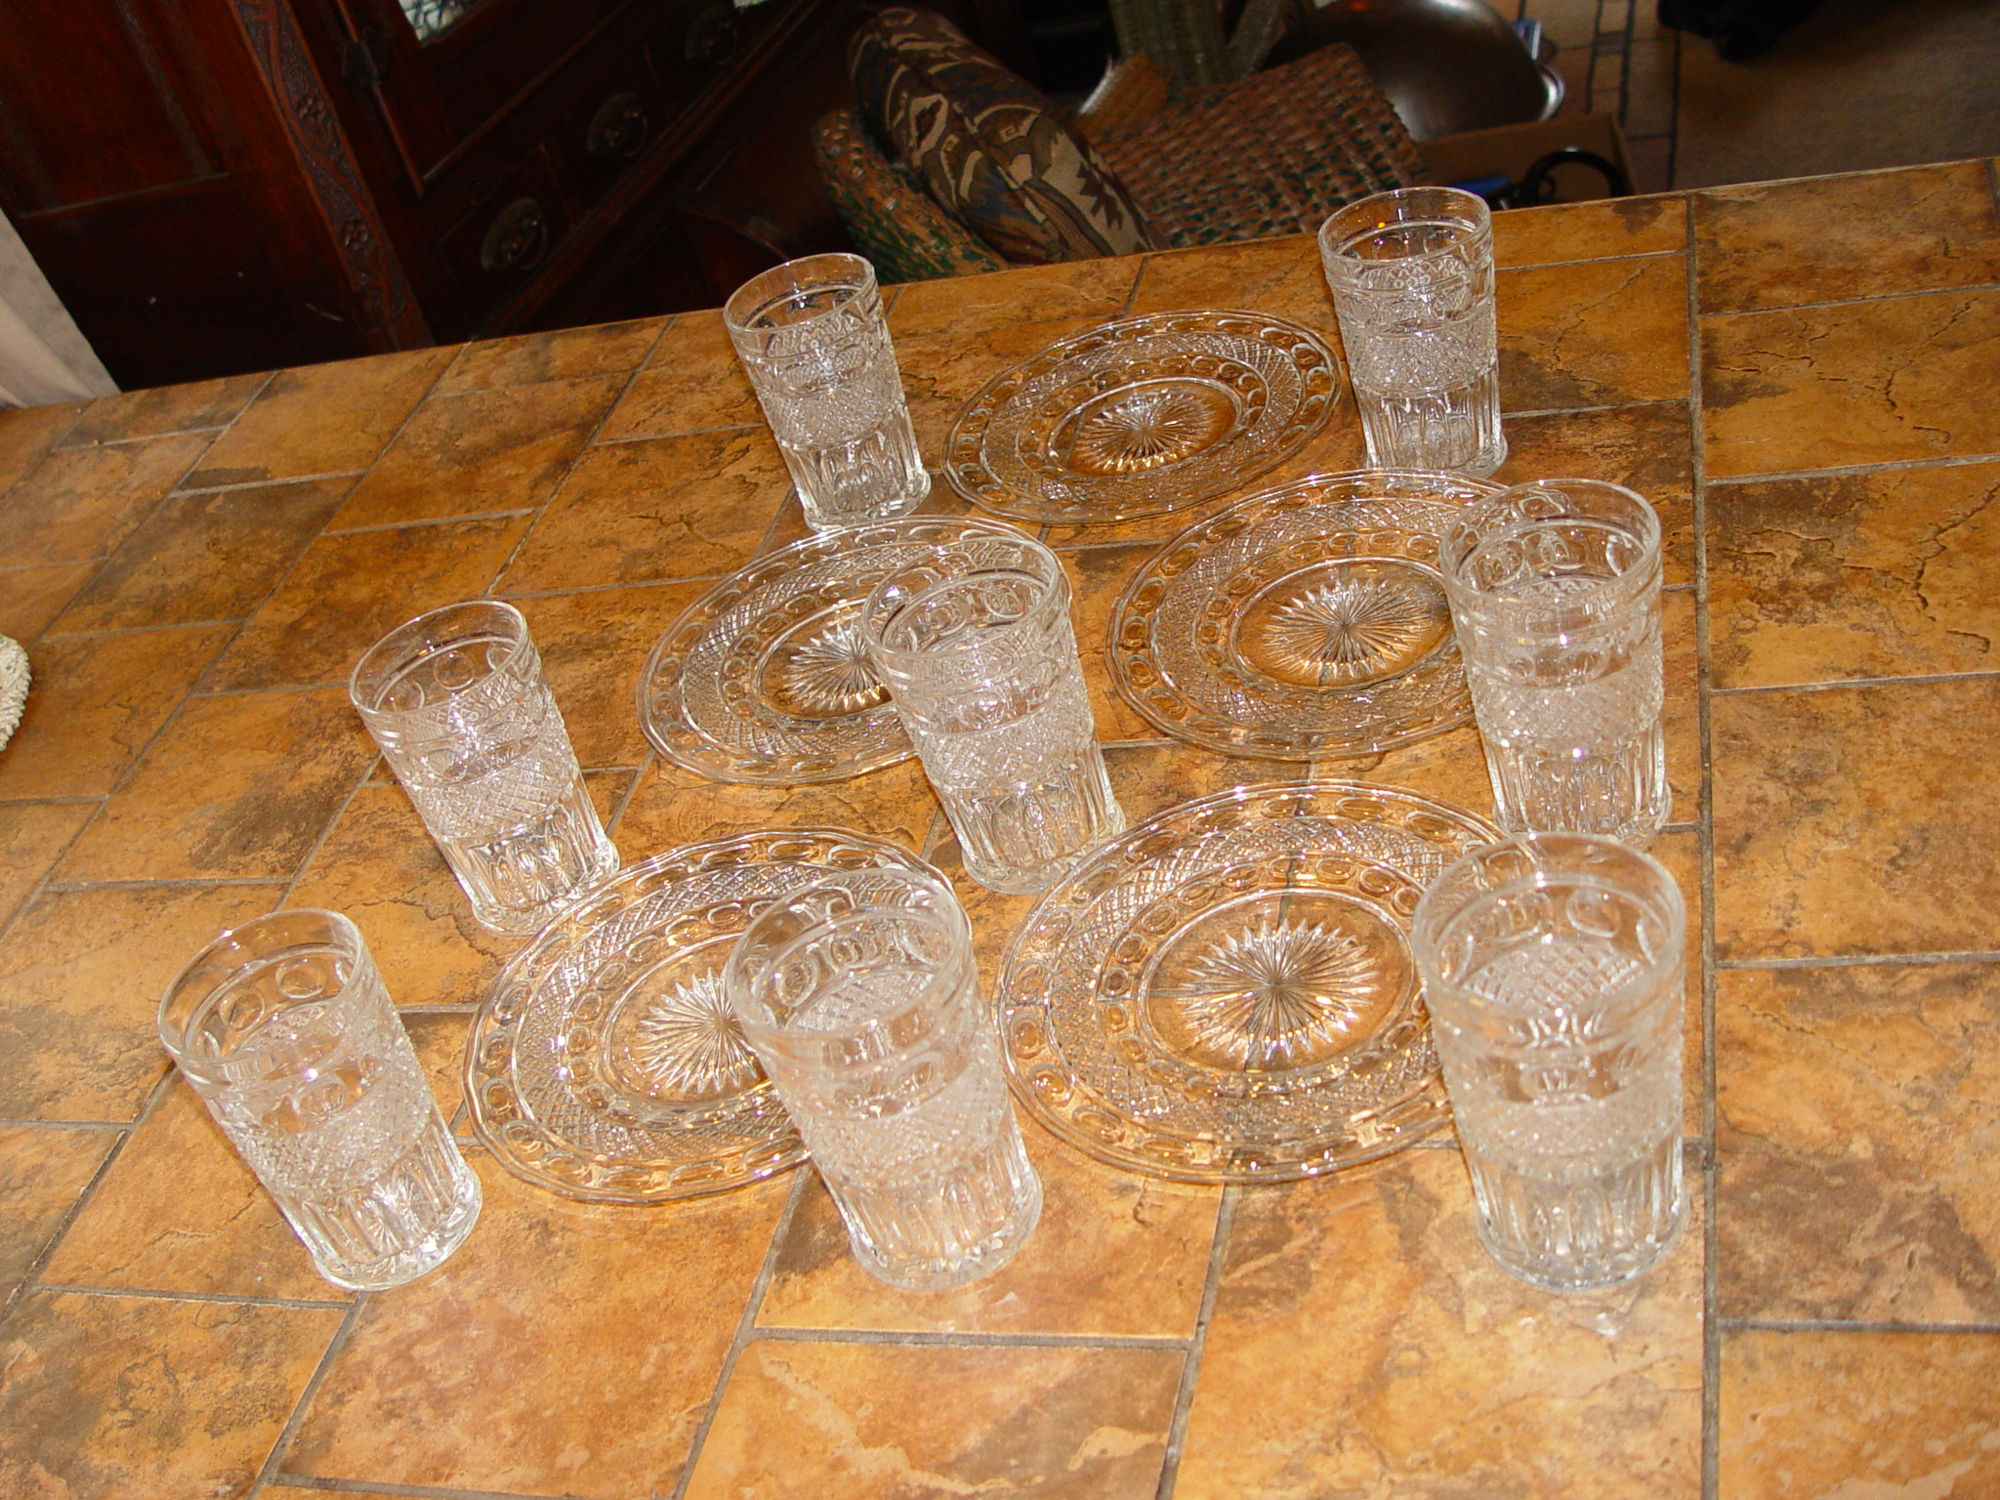 Diamond Band Elongated
                                        Thumbprint, McKee Plymouth Lot
                                        of 13 Water Tumblers, Luncheon
                                        Plates